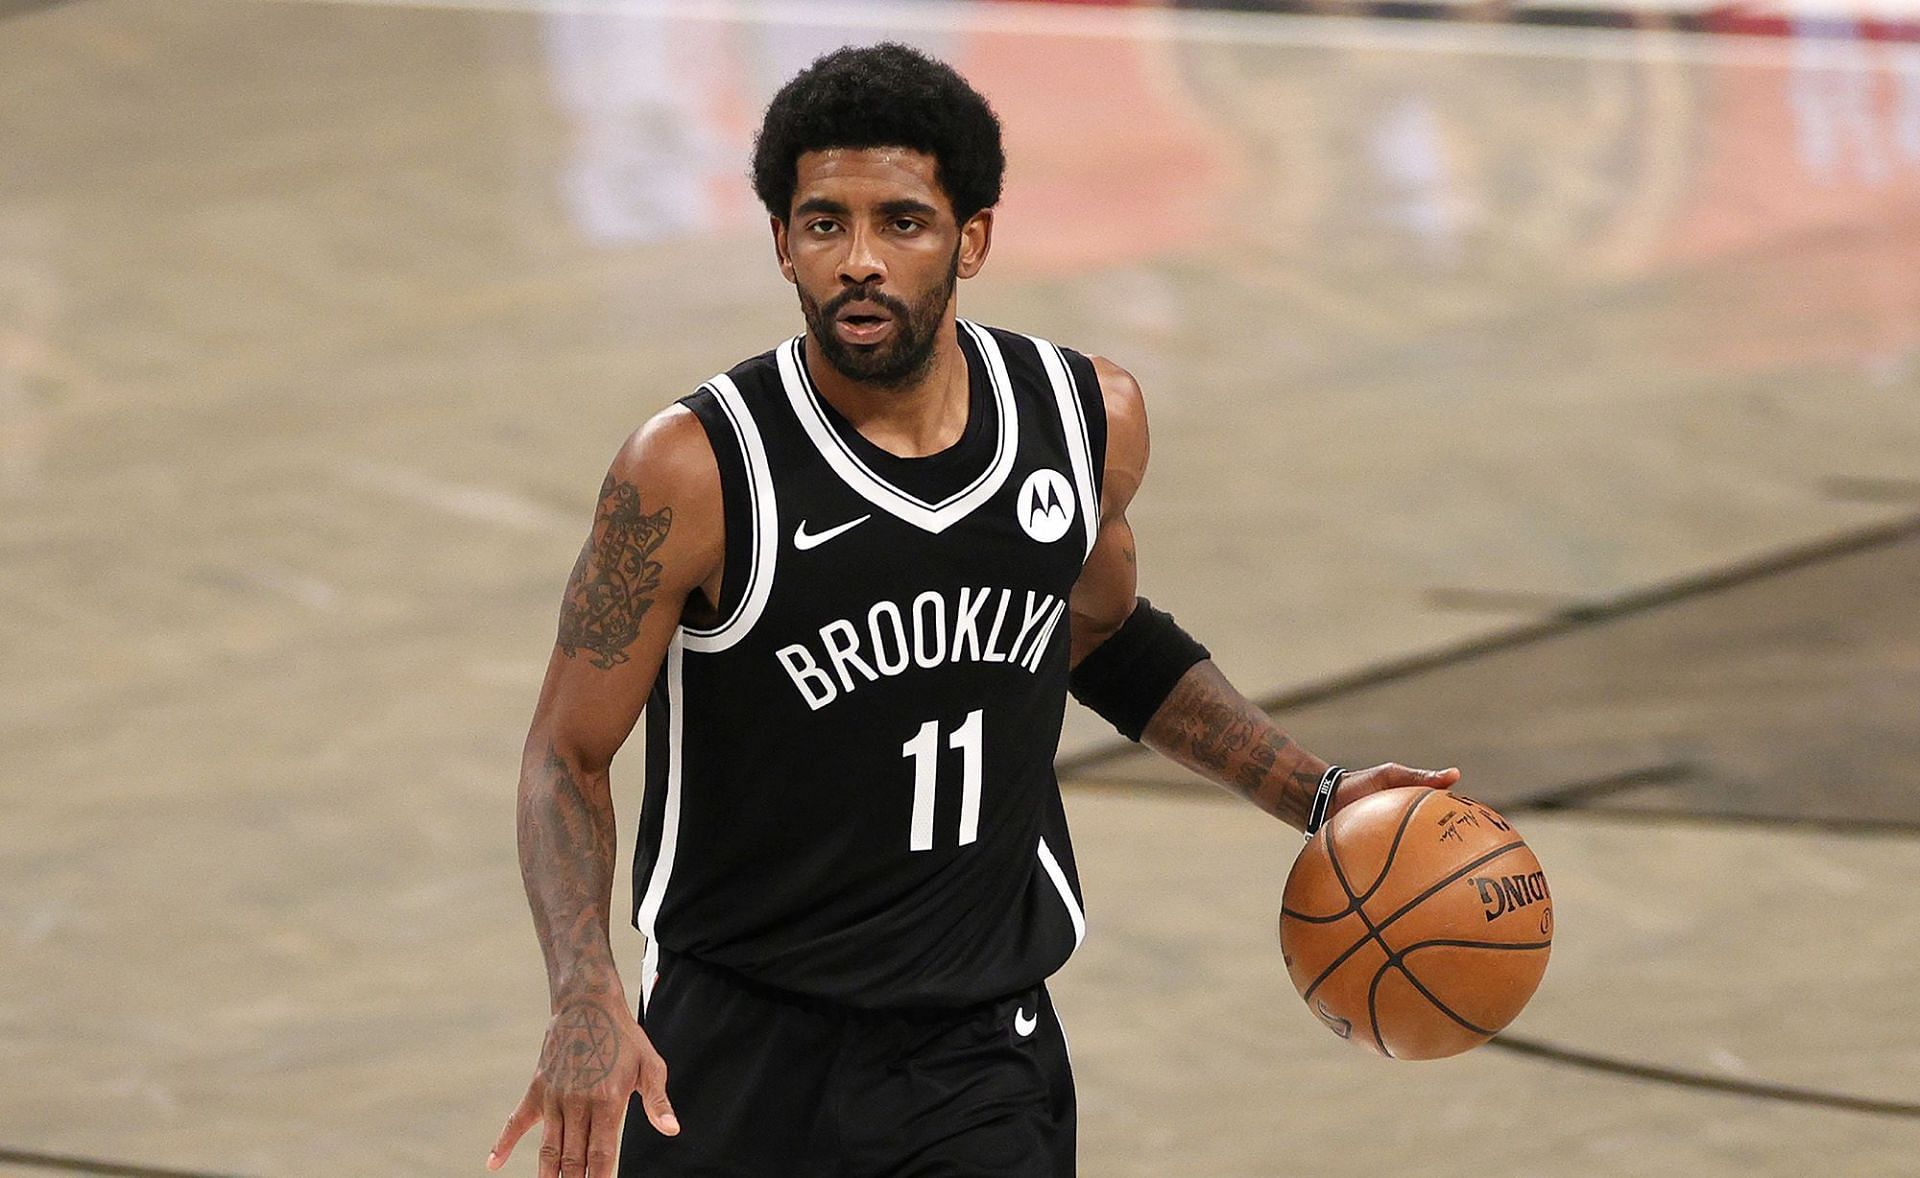 Kyrie Irving will undoubtedly opt out to seek a max extension contract from the Brooklyn Nets. [Photo:Boston.com]